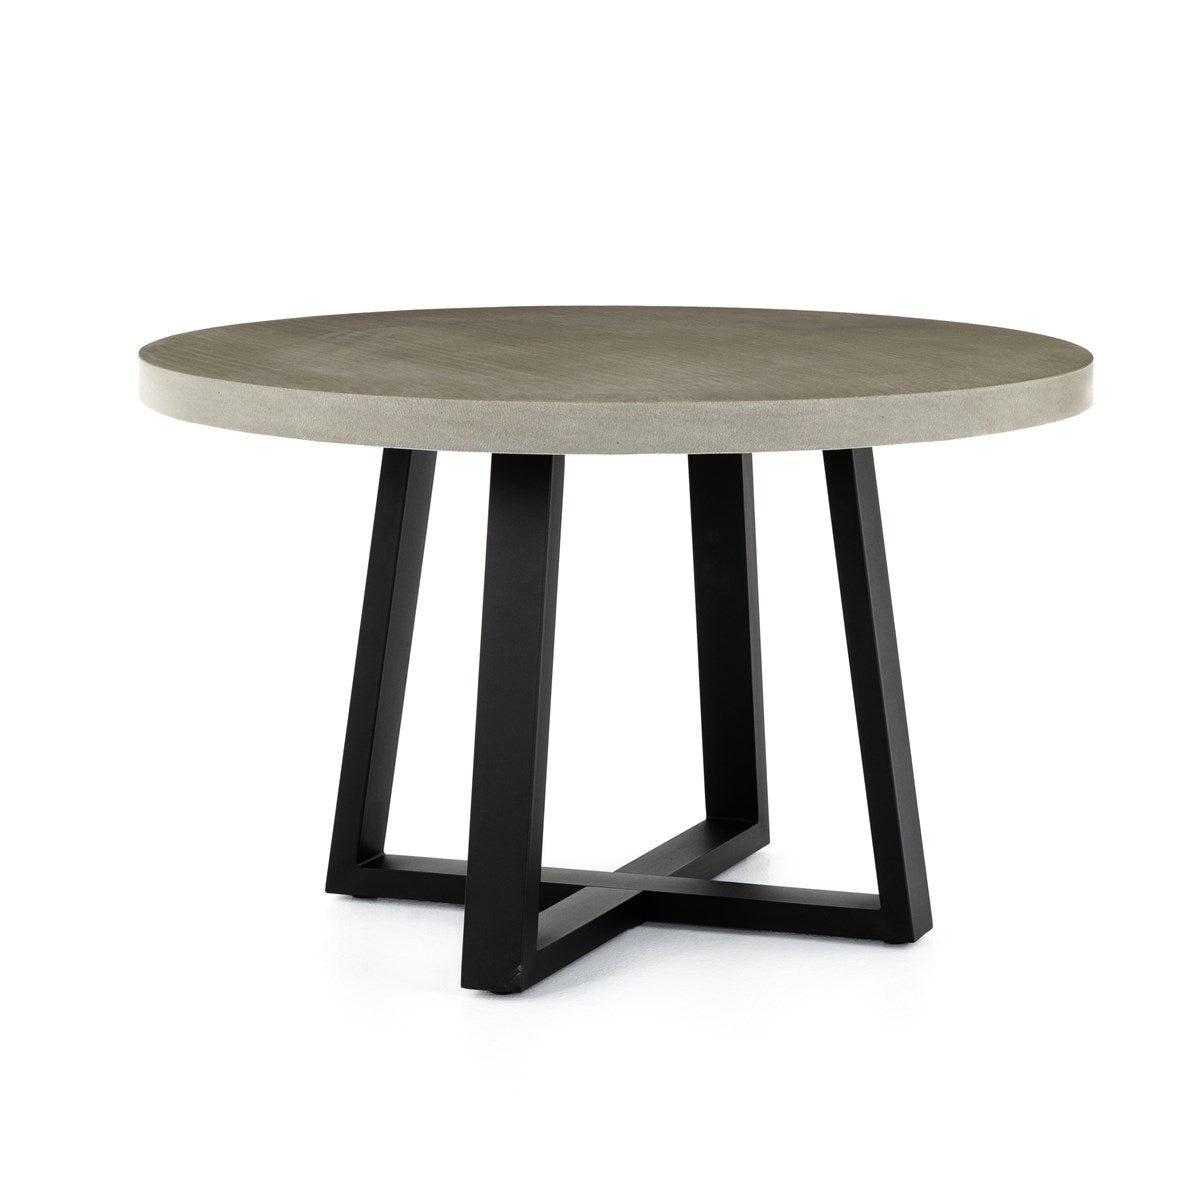 Cyrus Outdoor Round Dining Table 48"Dining Table Four Hands  48"   Four Hands, Burke Decor, Mid Century Modern Furniture, Old Bones Furniture Company, Old Bones Co, Modern Mid Century, Designer Furniture, https://www.oldbonesco.com/